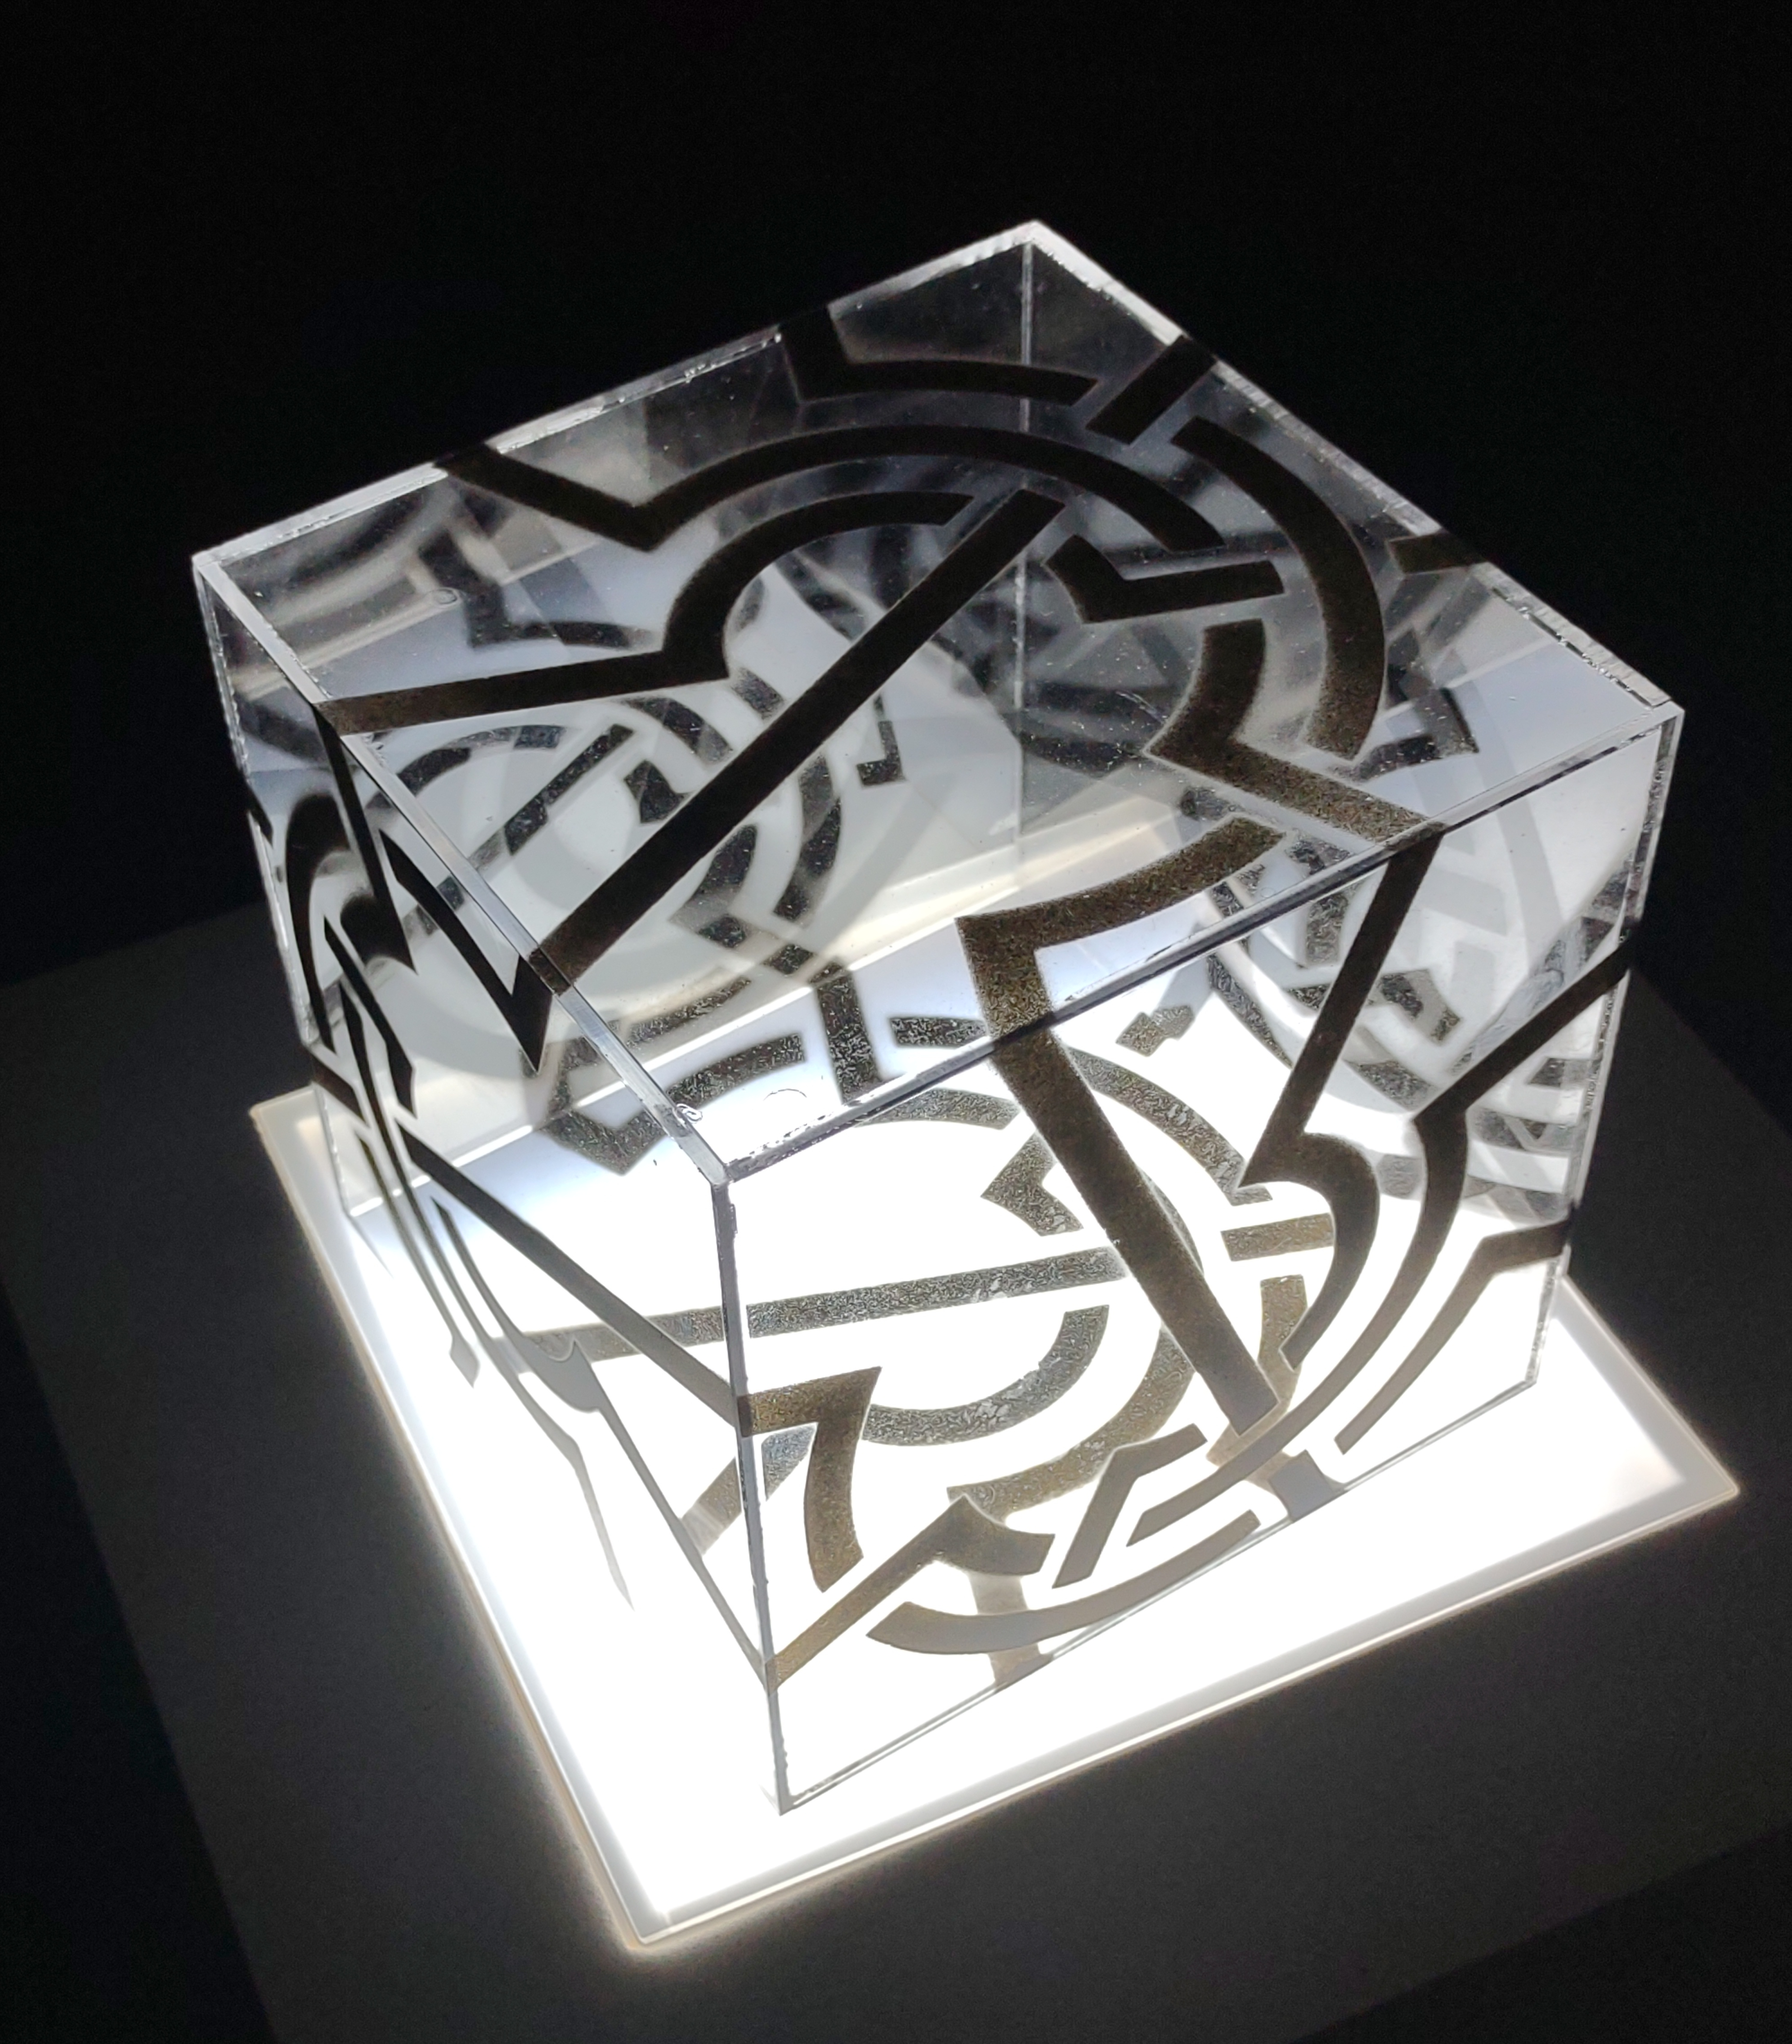 Adam Rowe, "reversed metatronic solid (hexahedron)", polymethyl methacrylate, paint, the last breath of fresh air from 2019, 6" cube